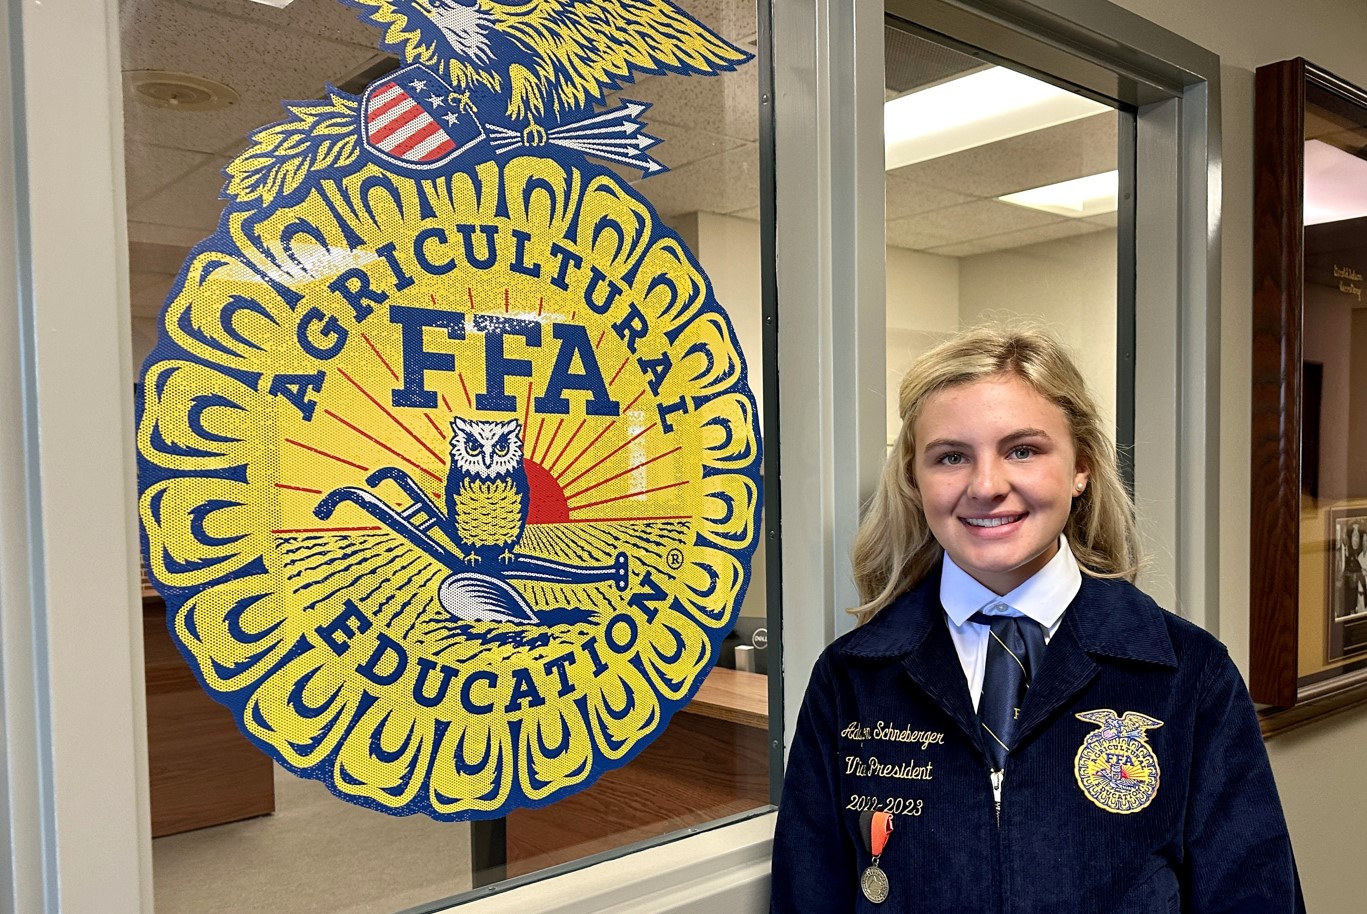 Addyson Schneberger Representing Oklahoma in the National FFA Creed Contest this Week